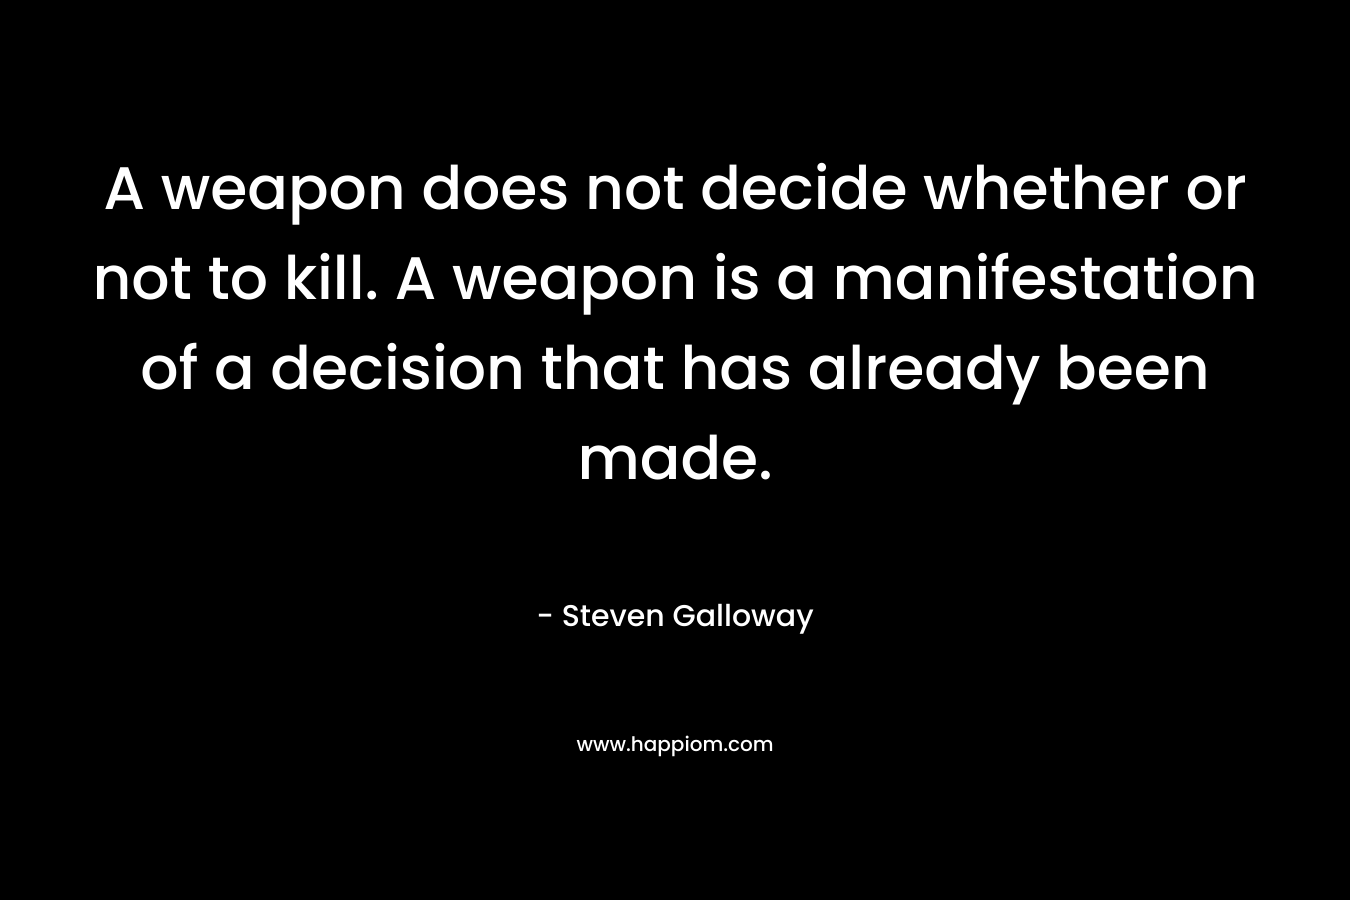 A weapon does not decide whether or not to kill. A weapon is a manifestation of a decision that has already been made.